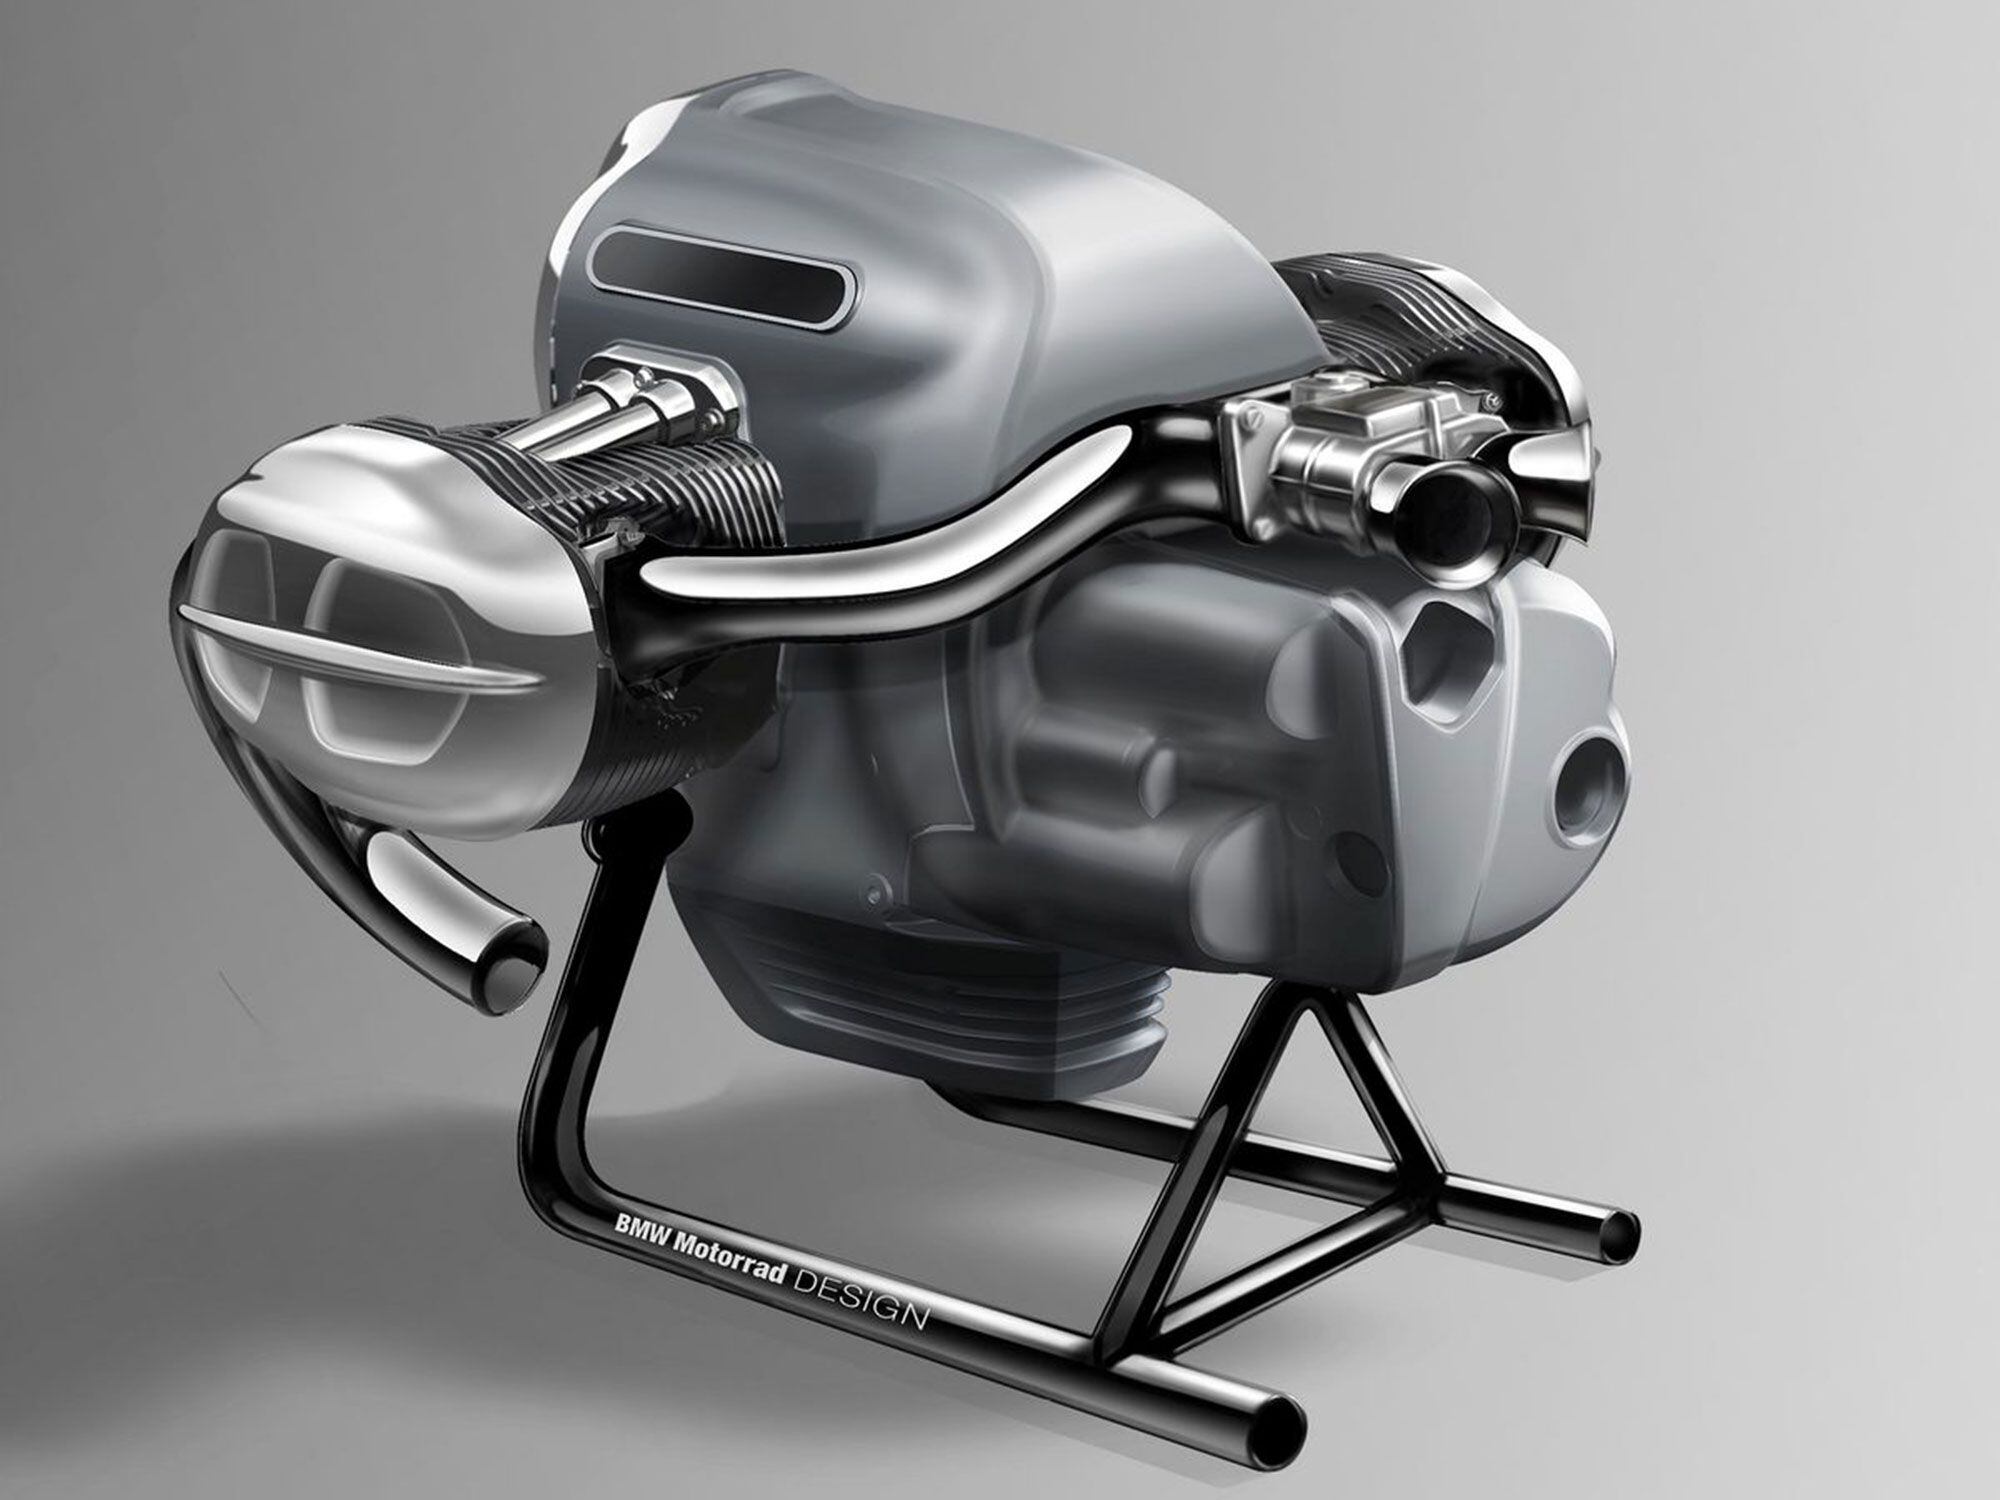 Both bikes will be powered by the same 1,802cc boxer twin engine on the first R 18 variants.